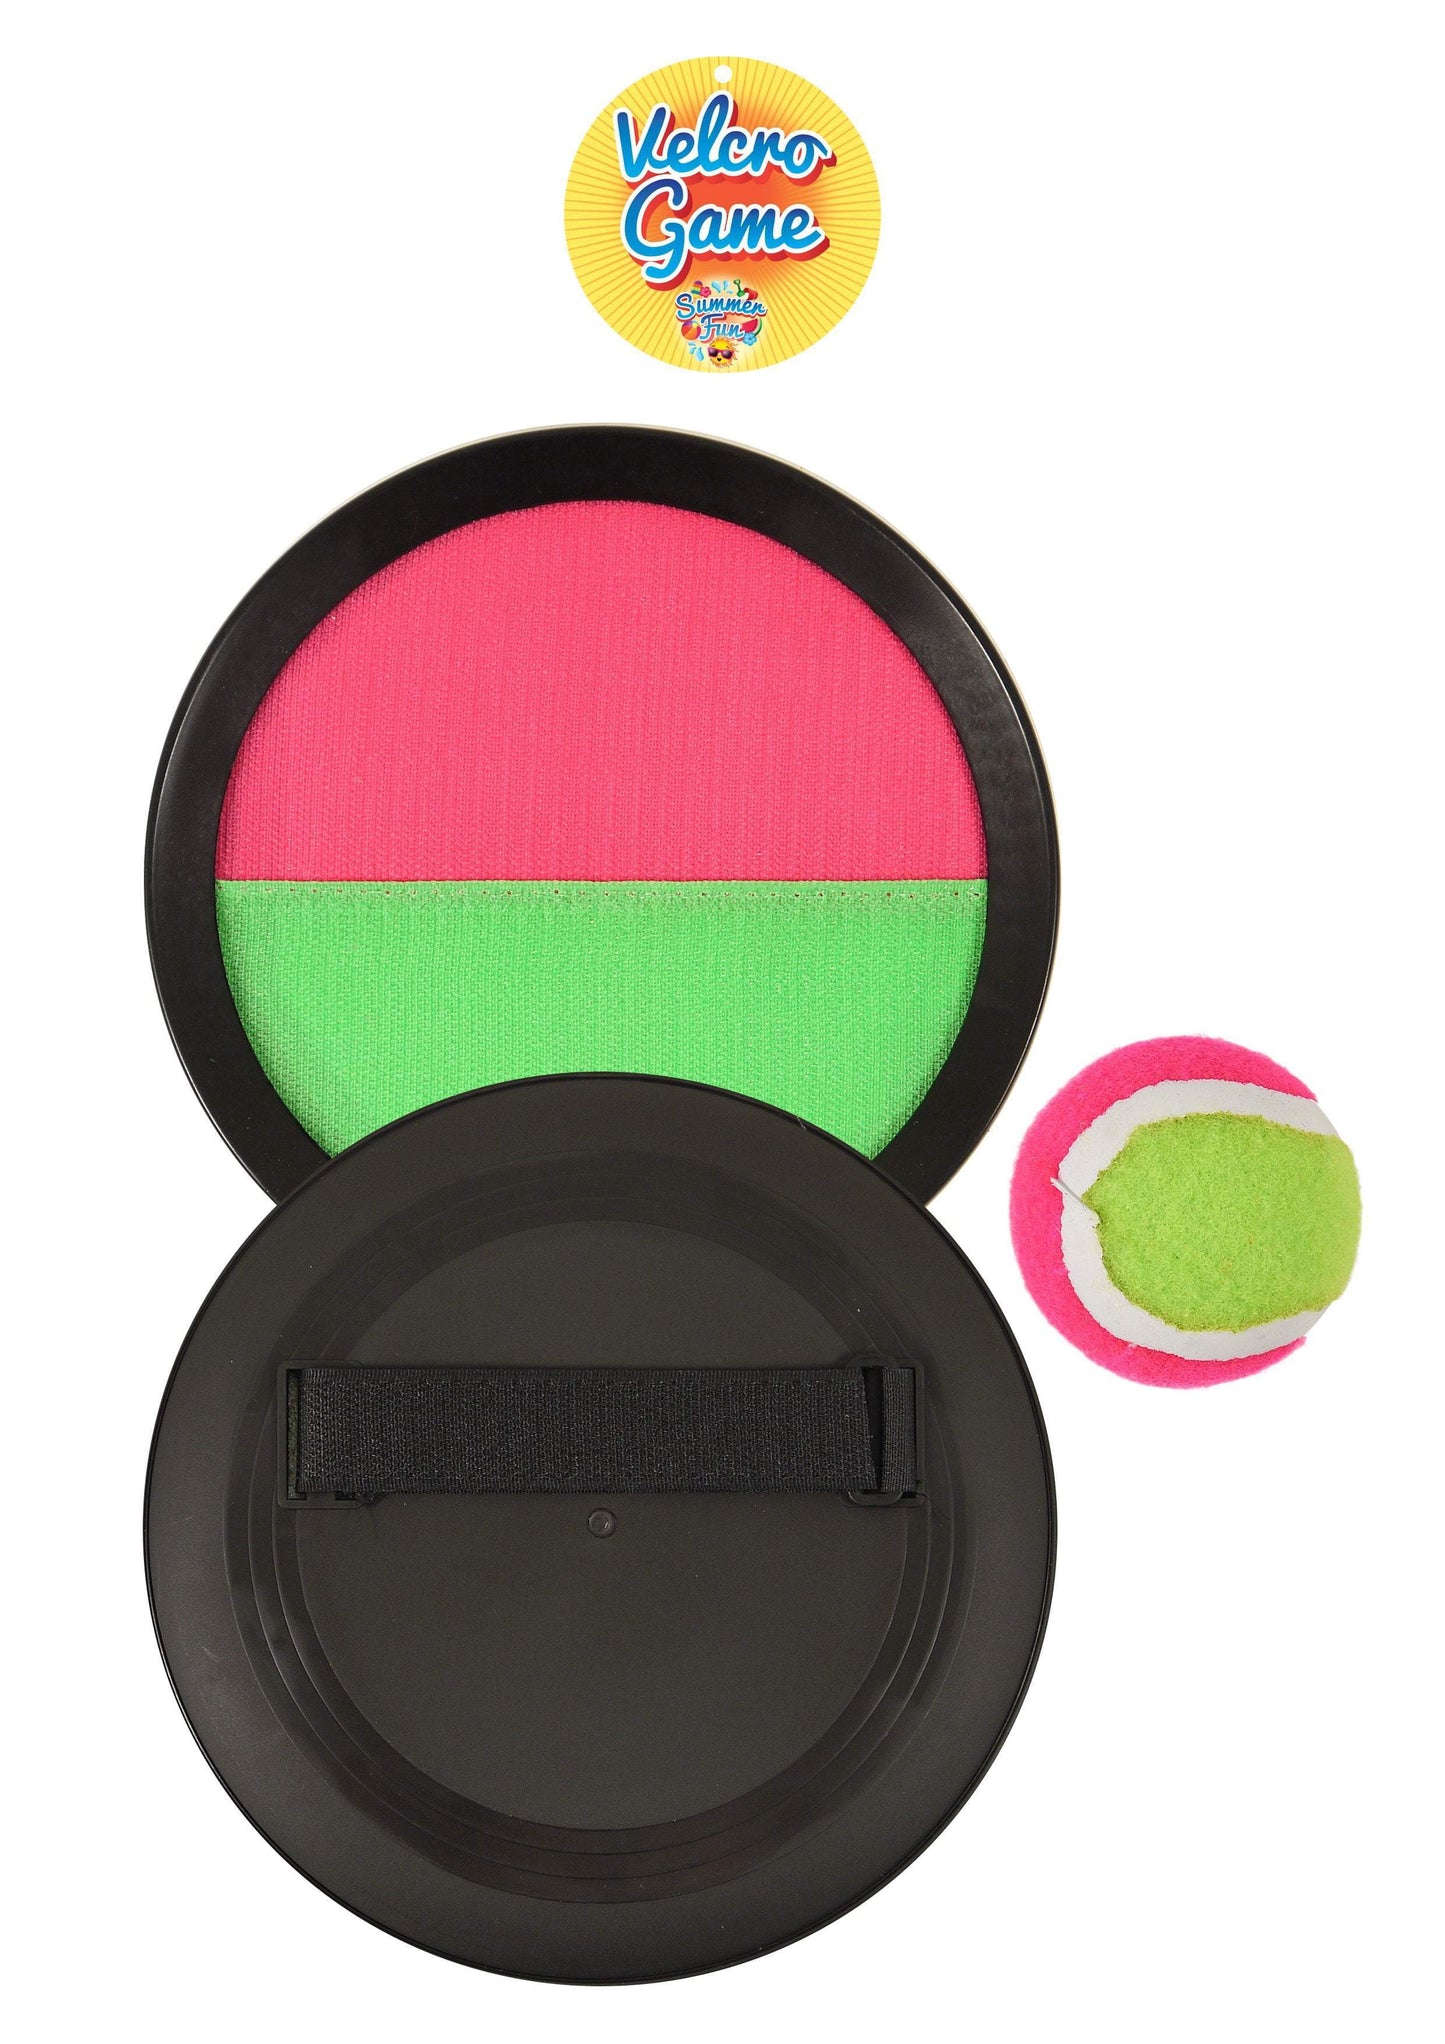 Fun Catch & Throw Ball Game Velcro Outdoor 2 Player 19cm R38087 (Parcel Rate)